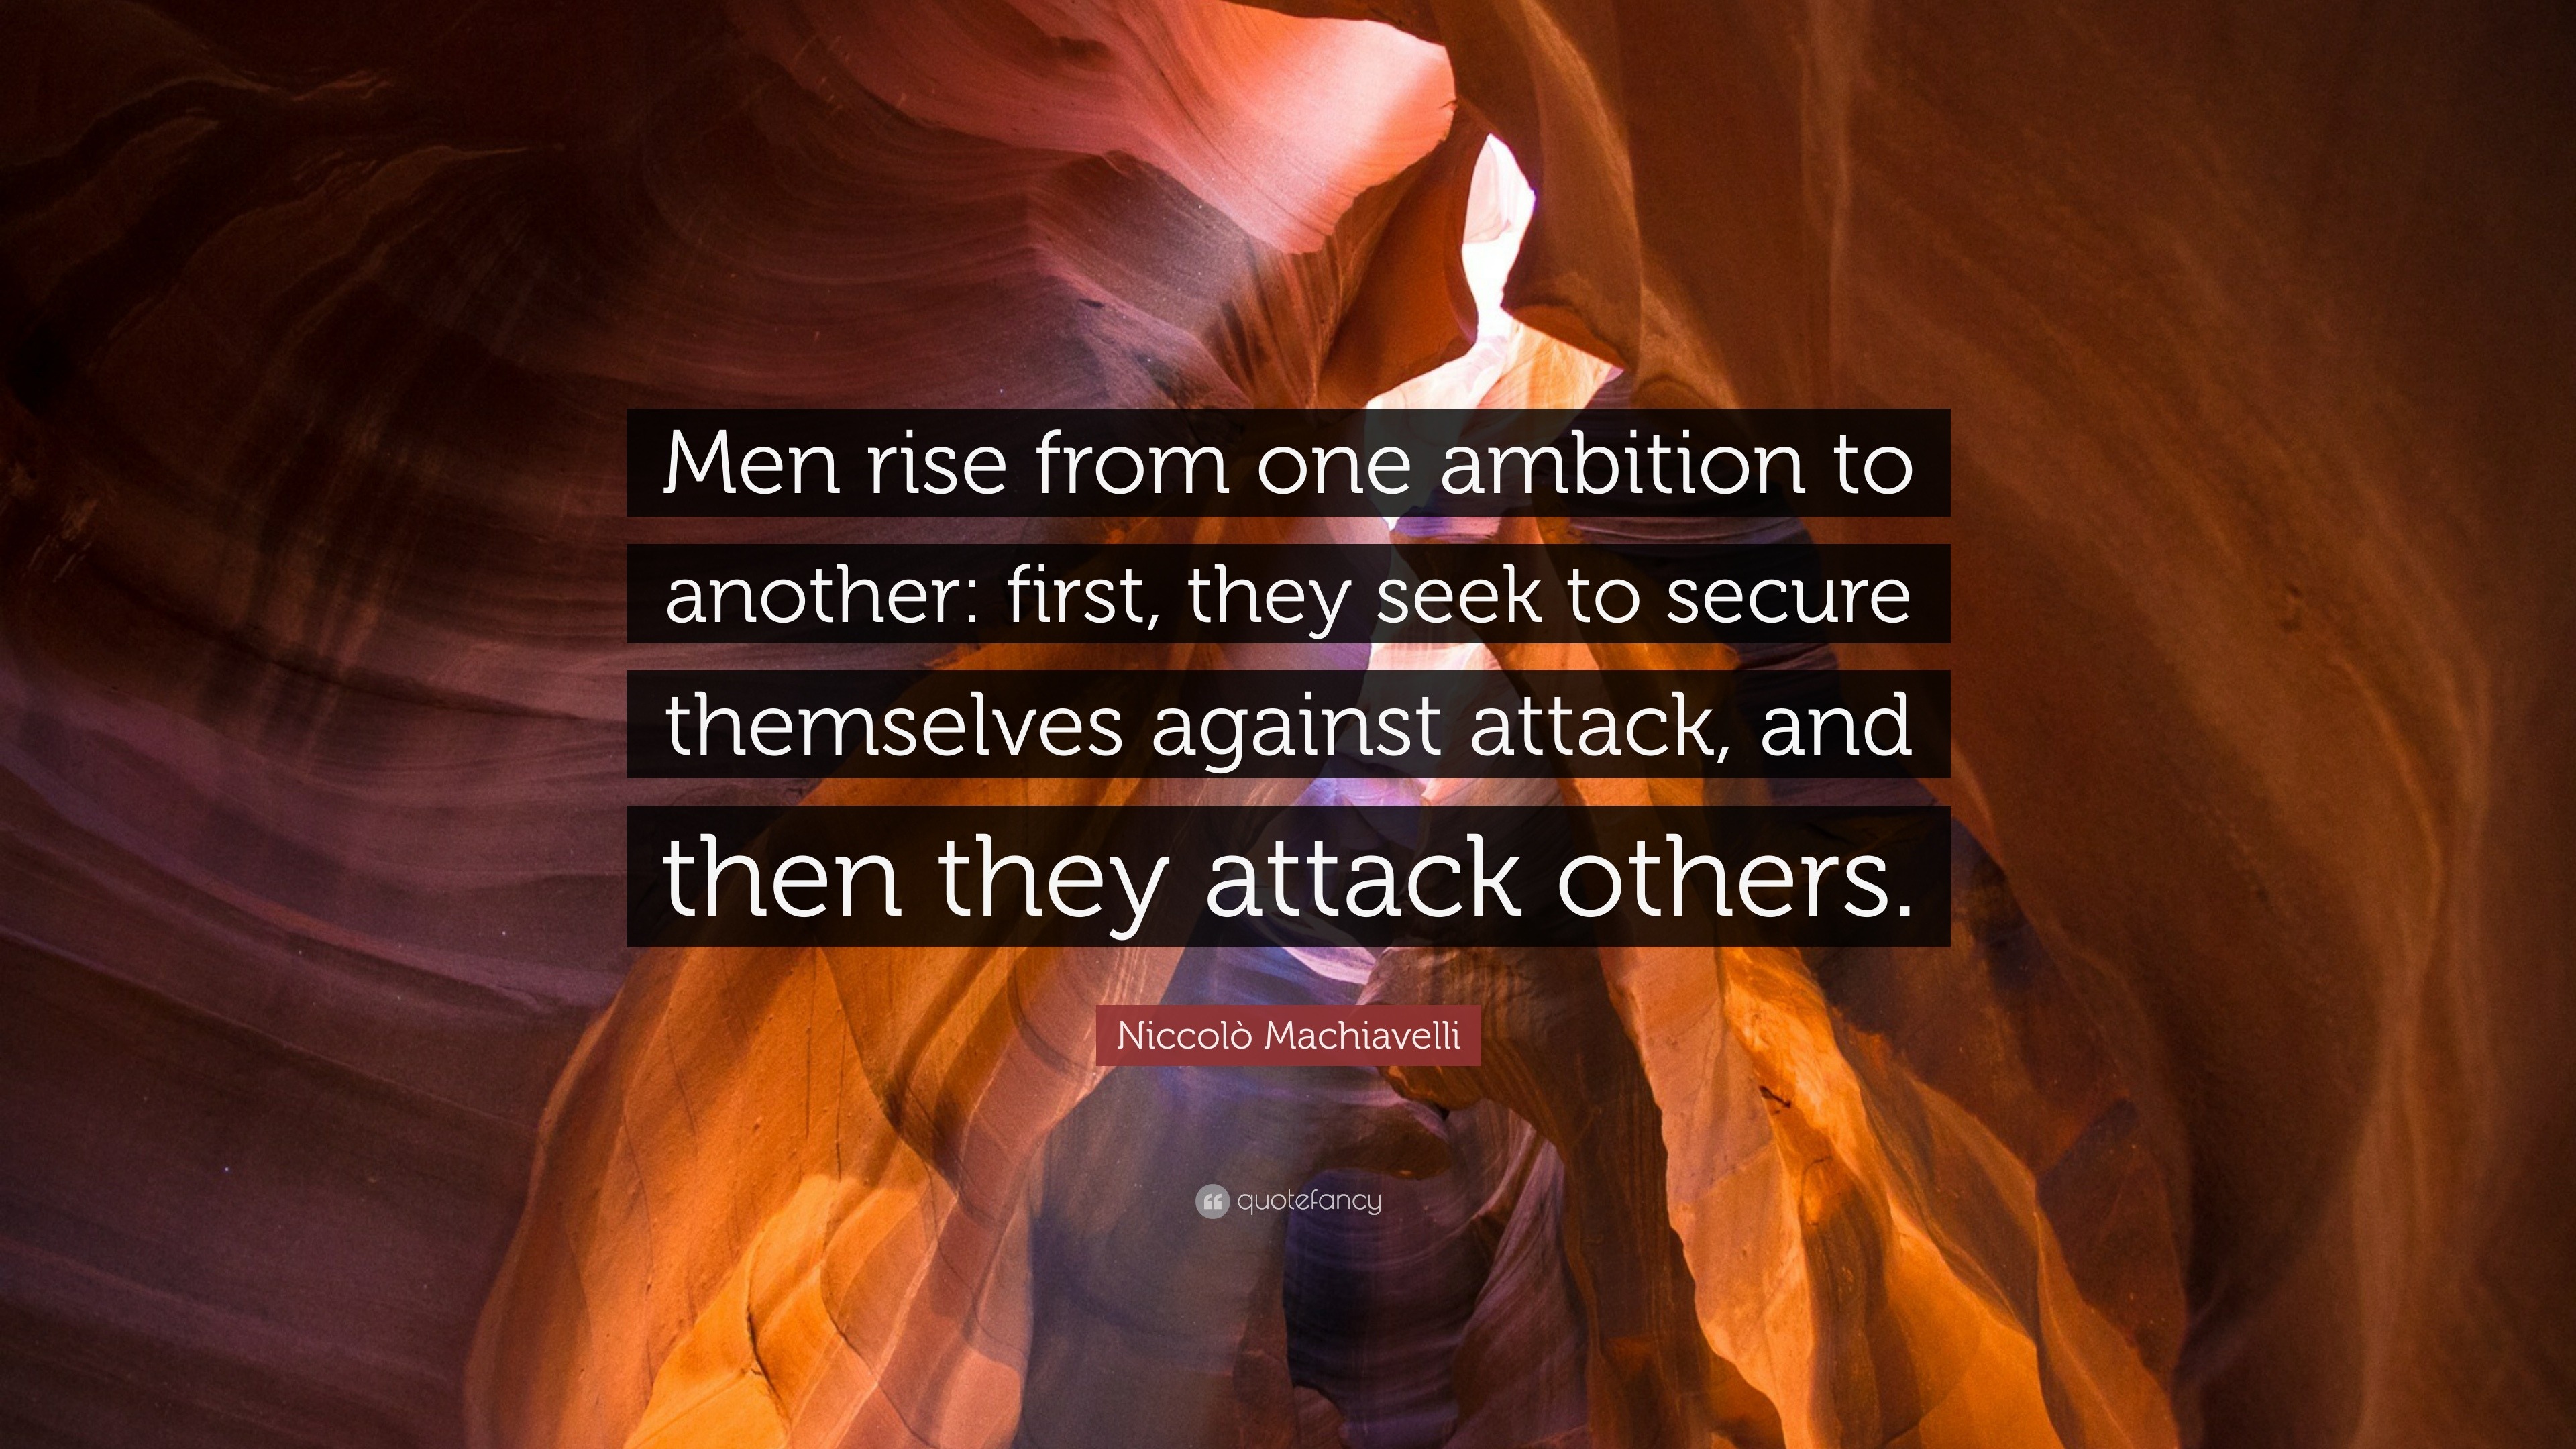 249288-Niccol-Machiavelli-Quote-Men-rise-from-one-ambition-to-another.jpg